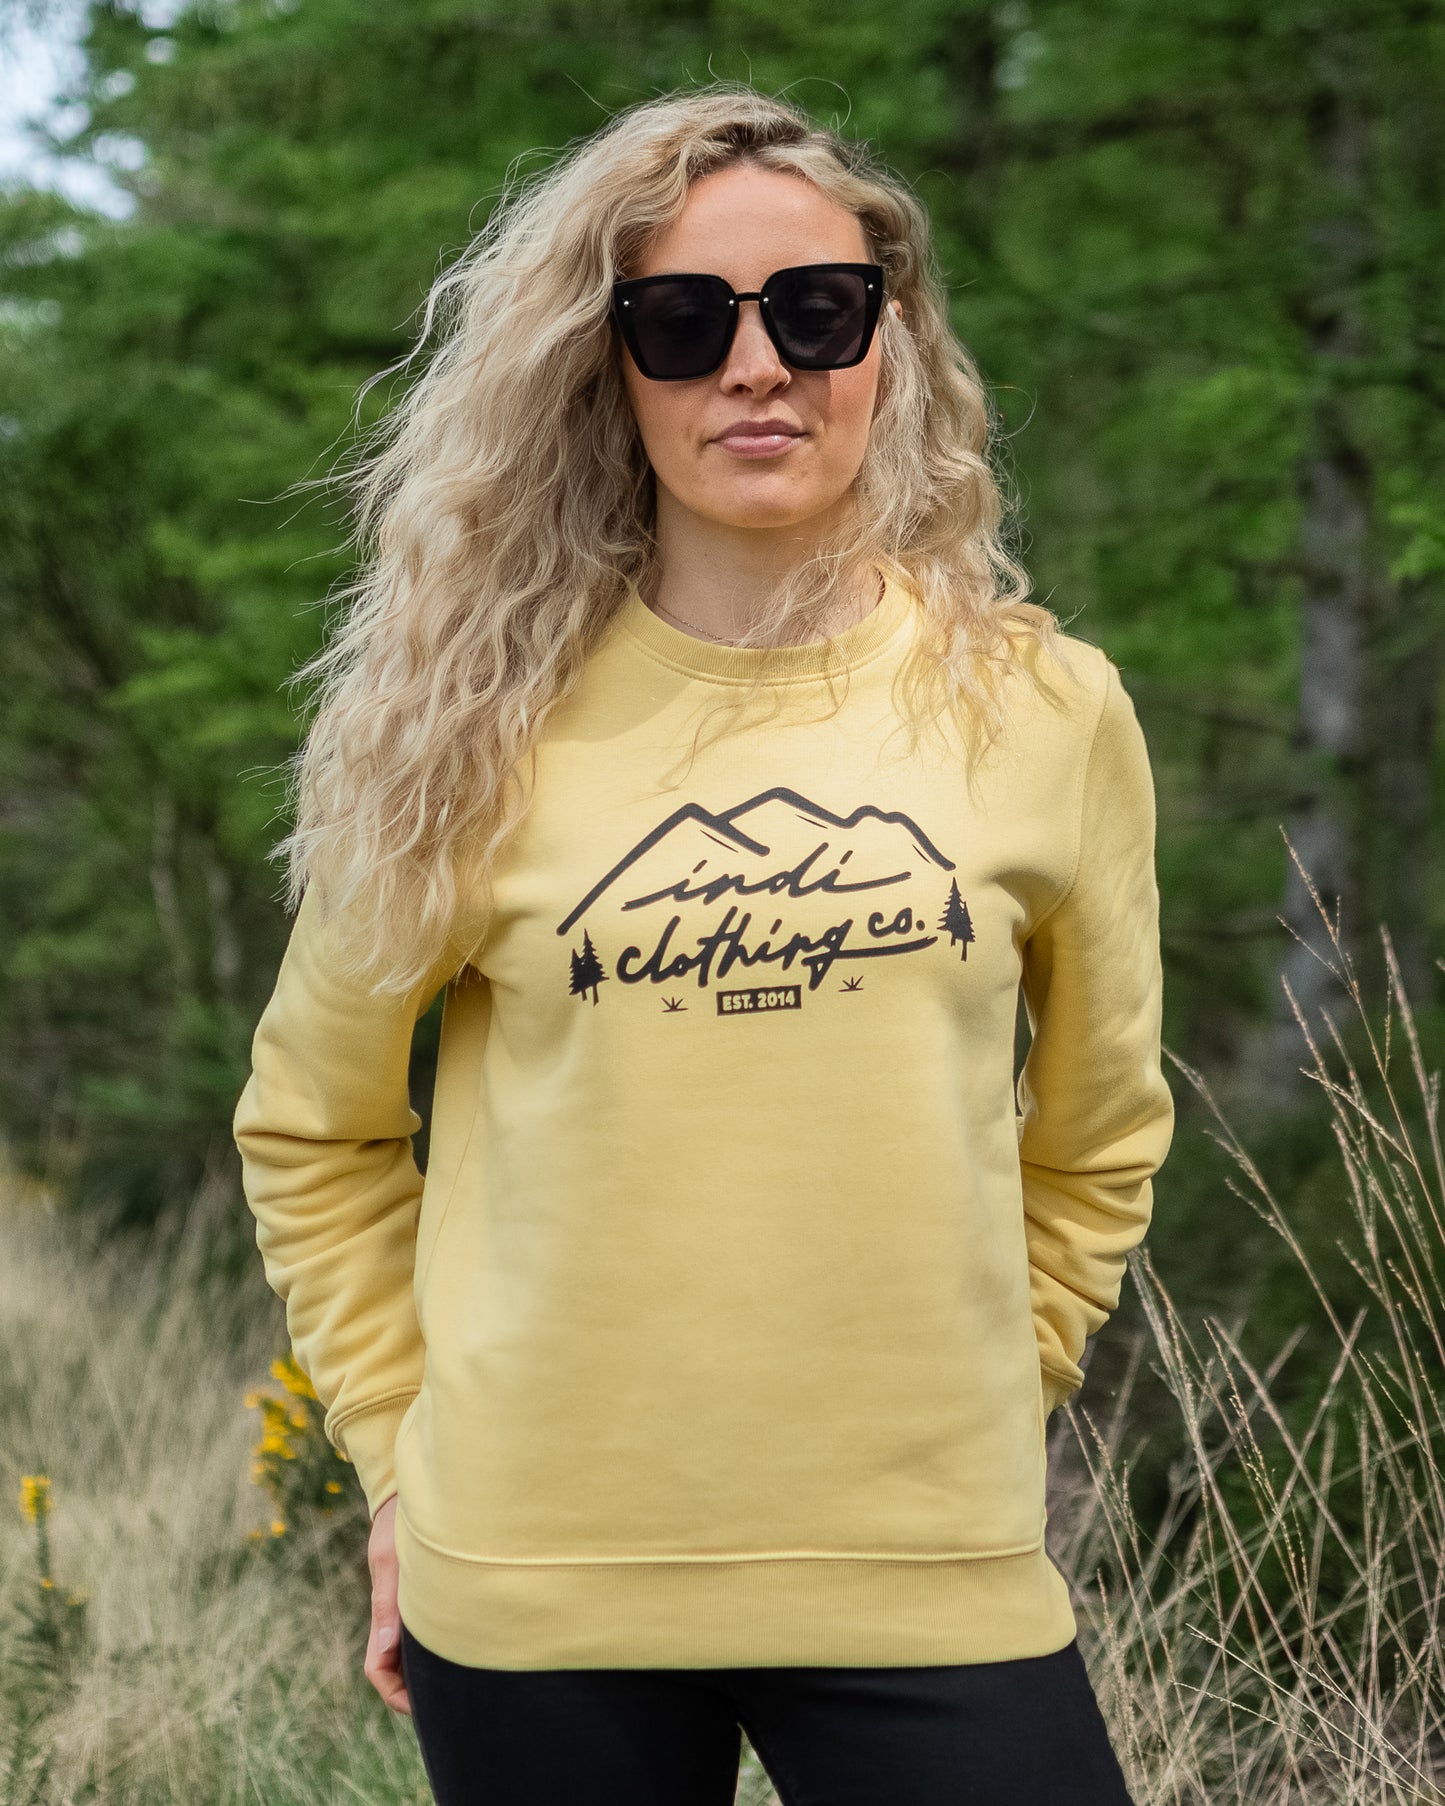 The Mountainscape Deluxe Sweater in Dusty Yellow